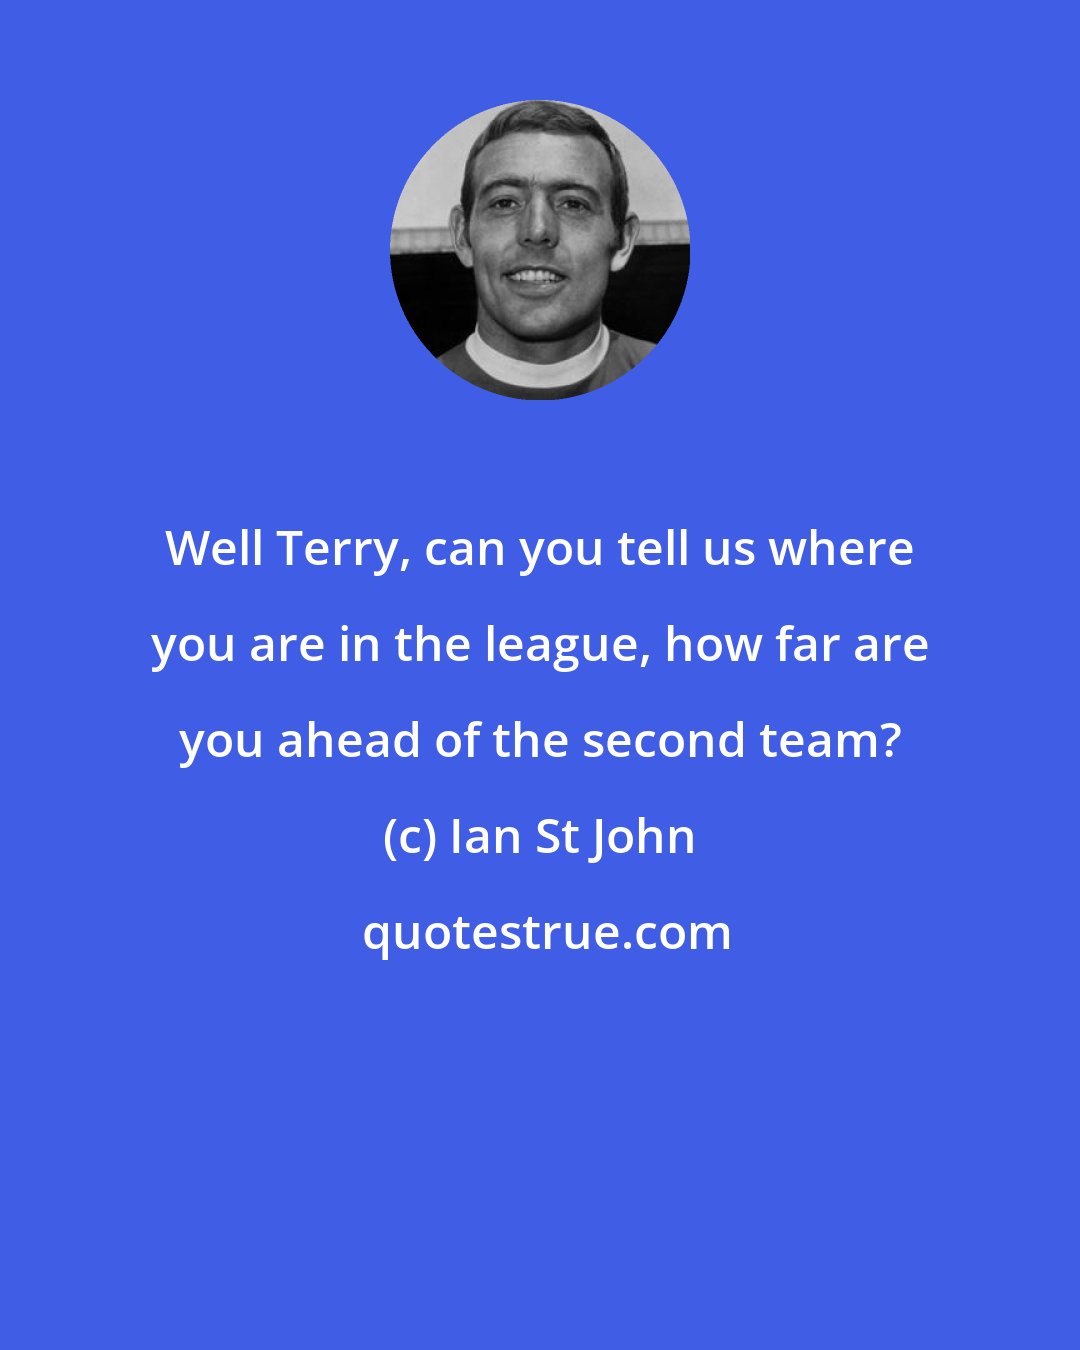 Ian St John: Well Terry, can you tell us where you are in the league, how far are you ahead of the second team?